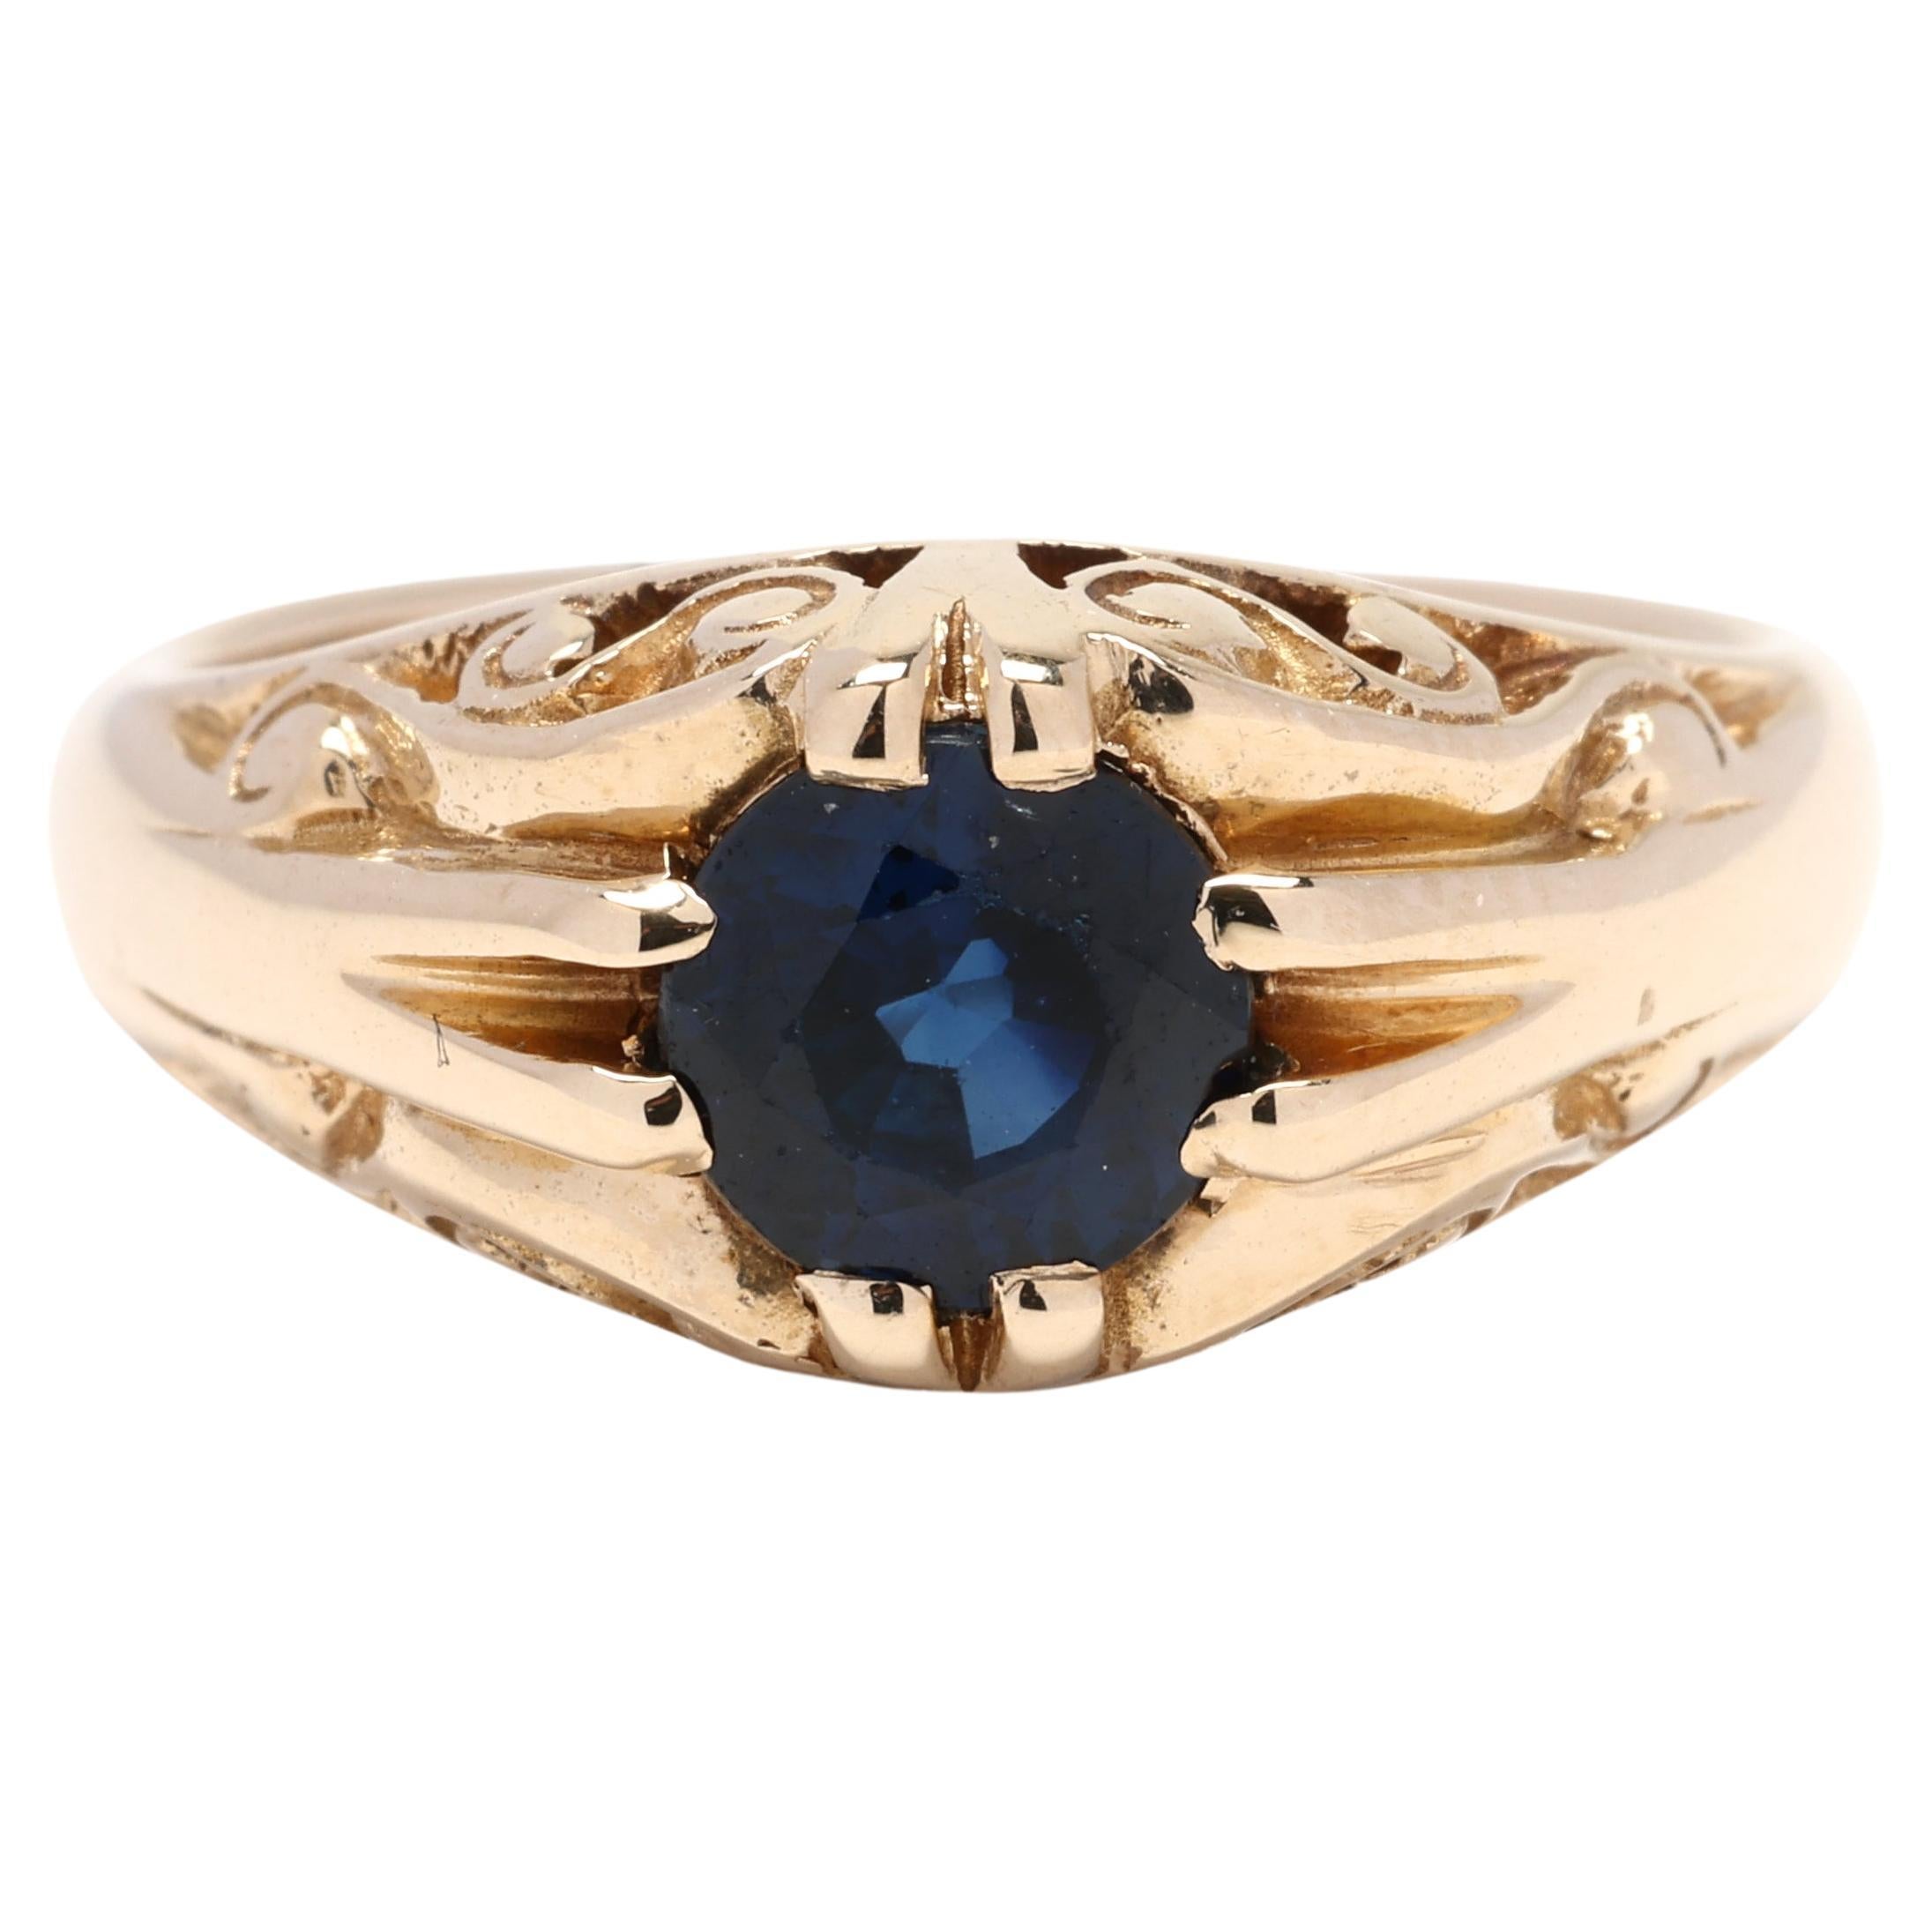 0.50ctw Sapphire Swirl Ring, 14k Yellow Gold, Ring Size 4.75, Antique Ring